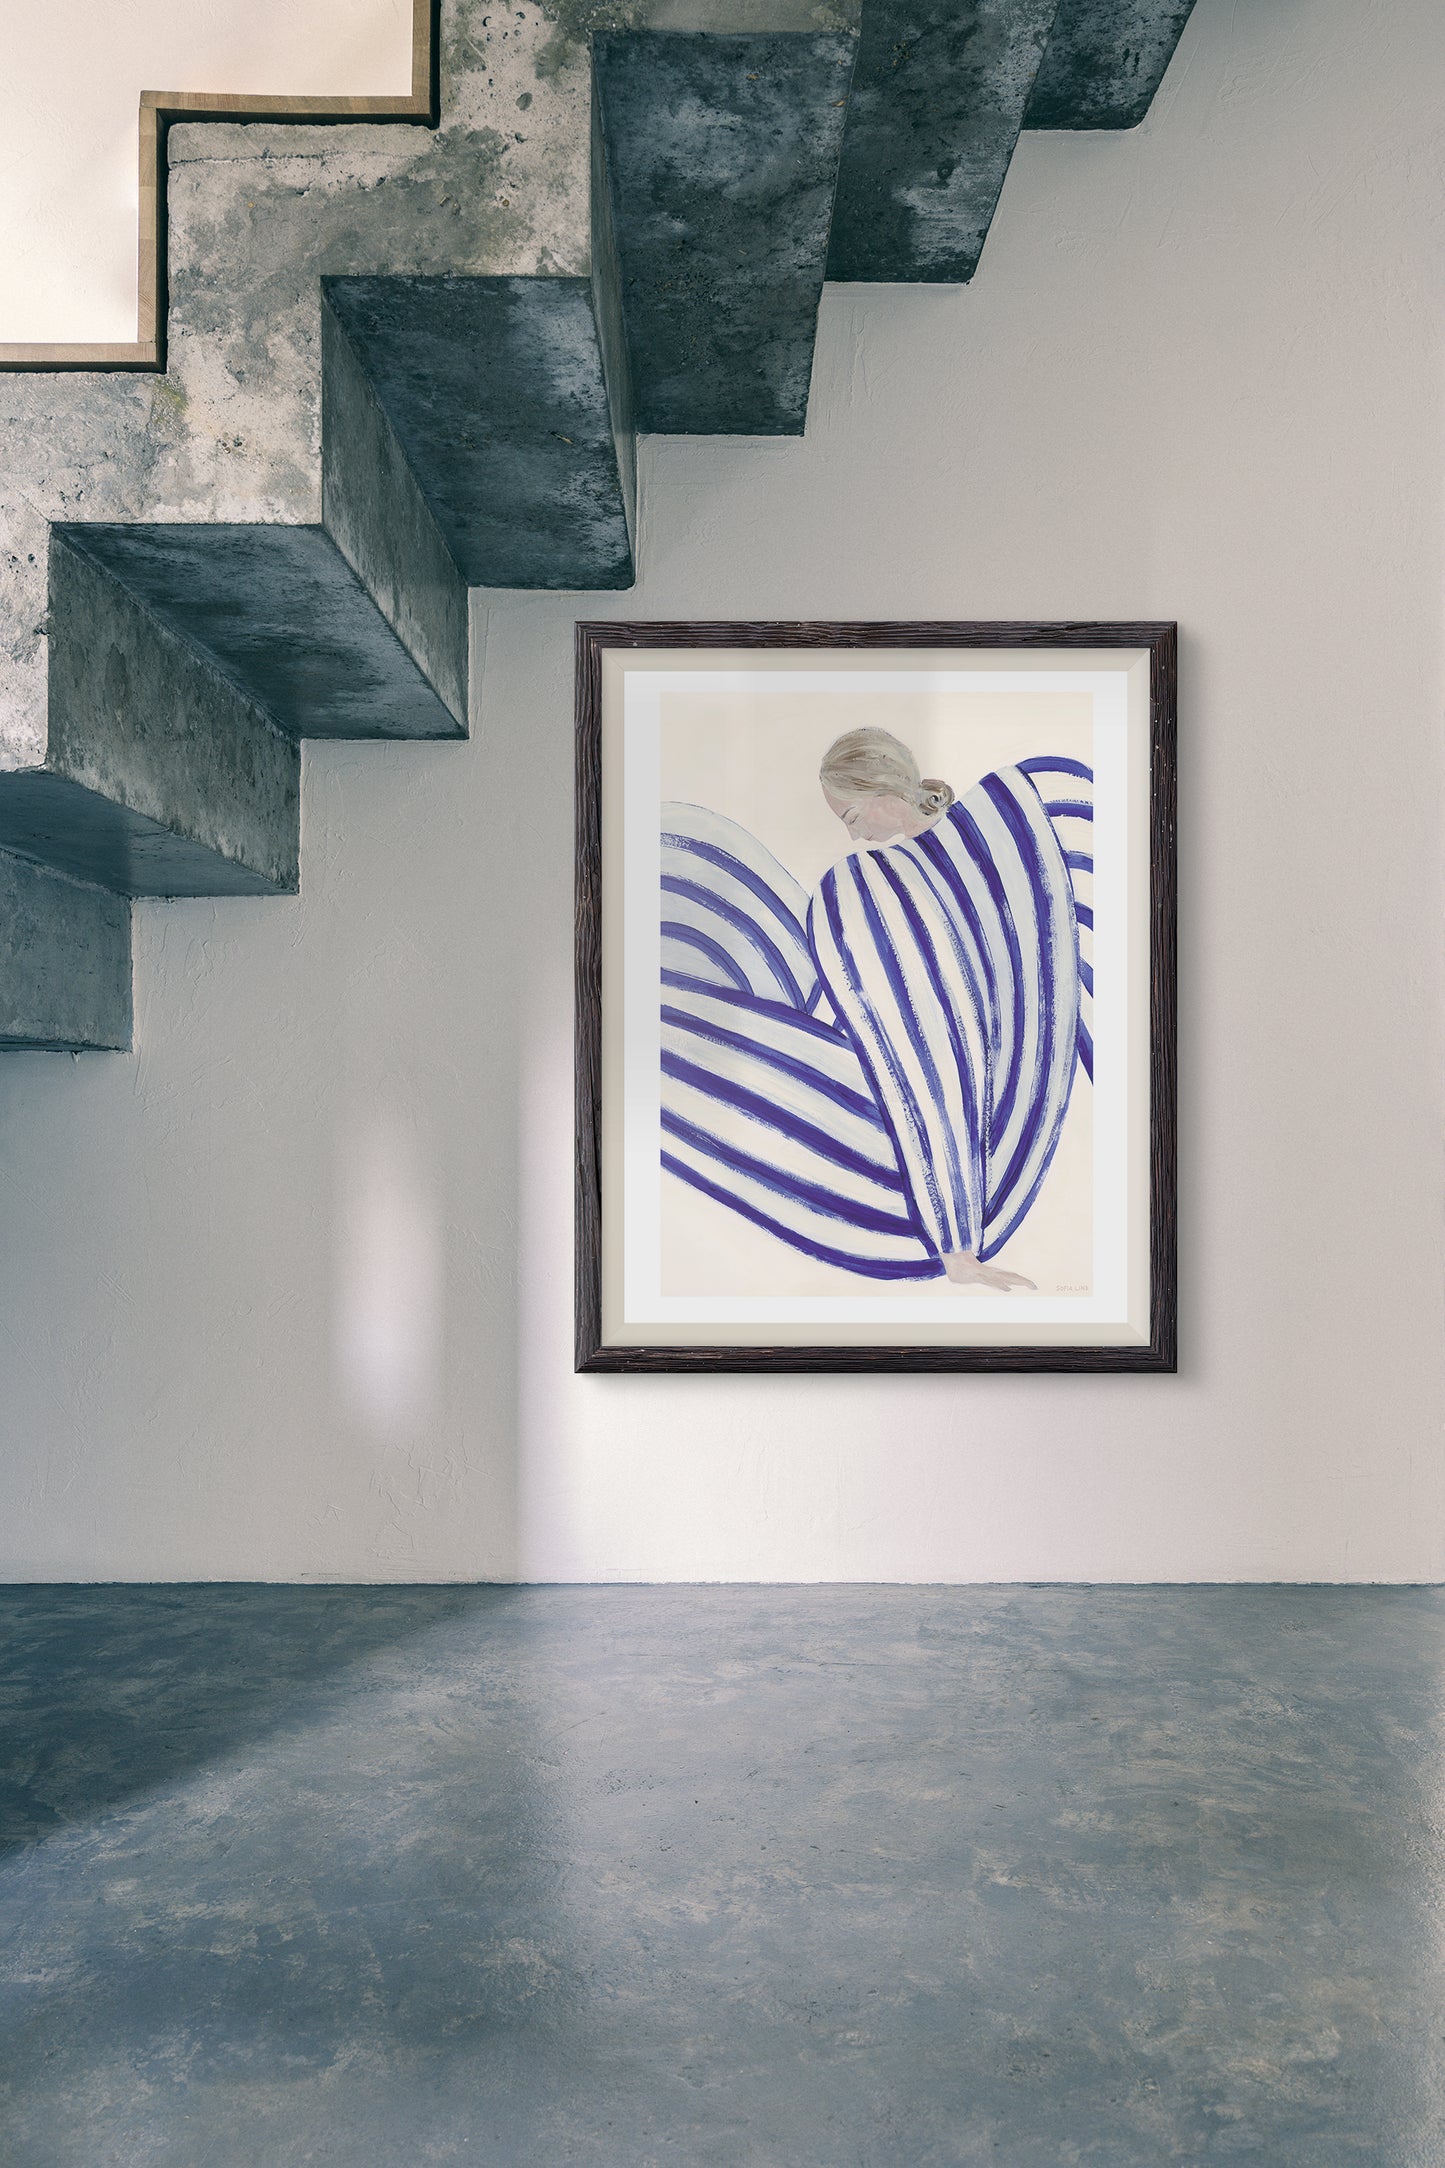 Blue Stripe at Concorde Art Poster by Sofia Lind